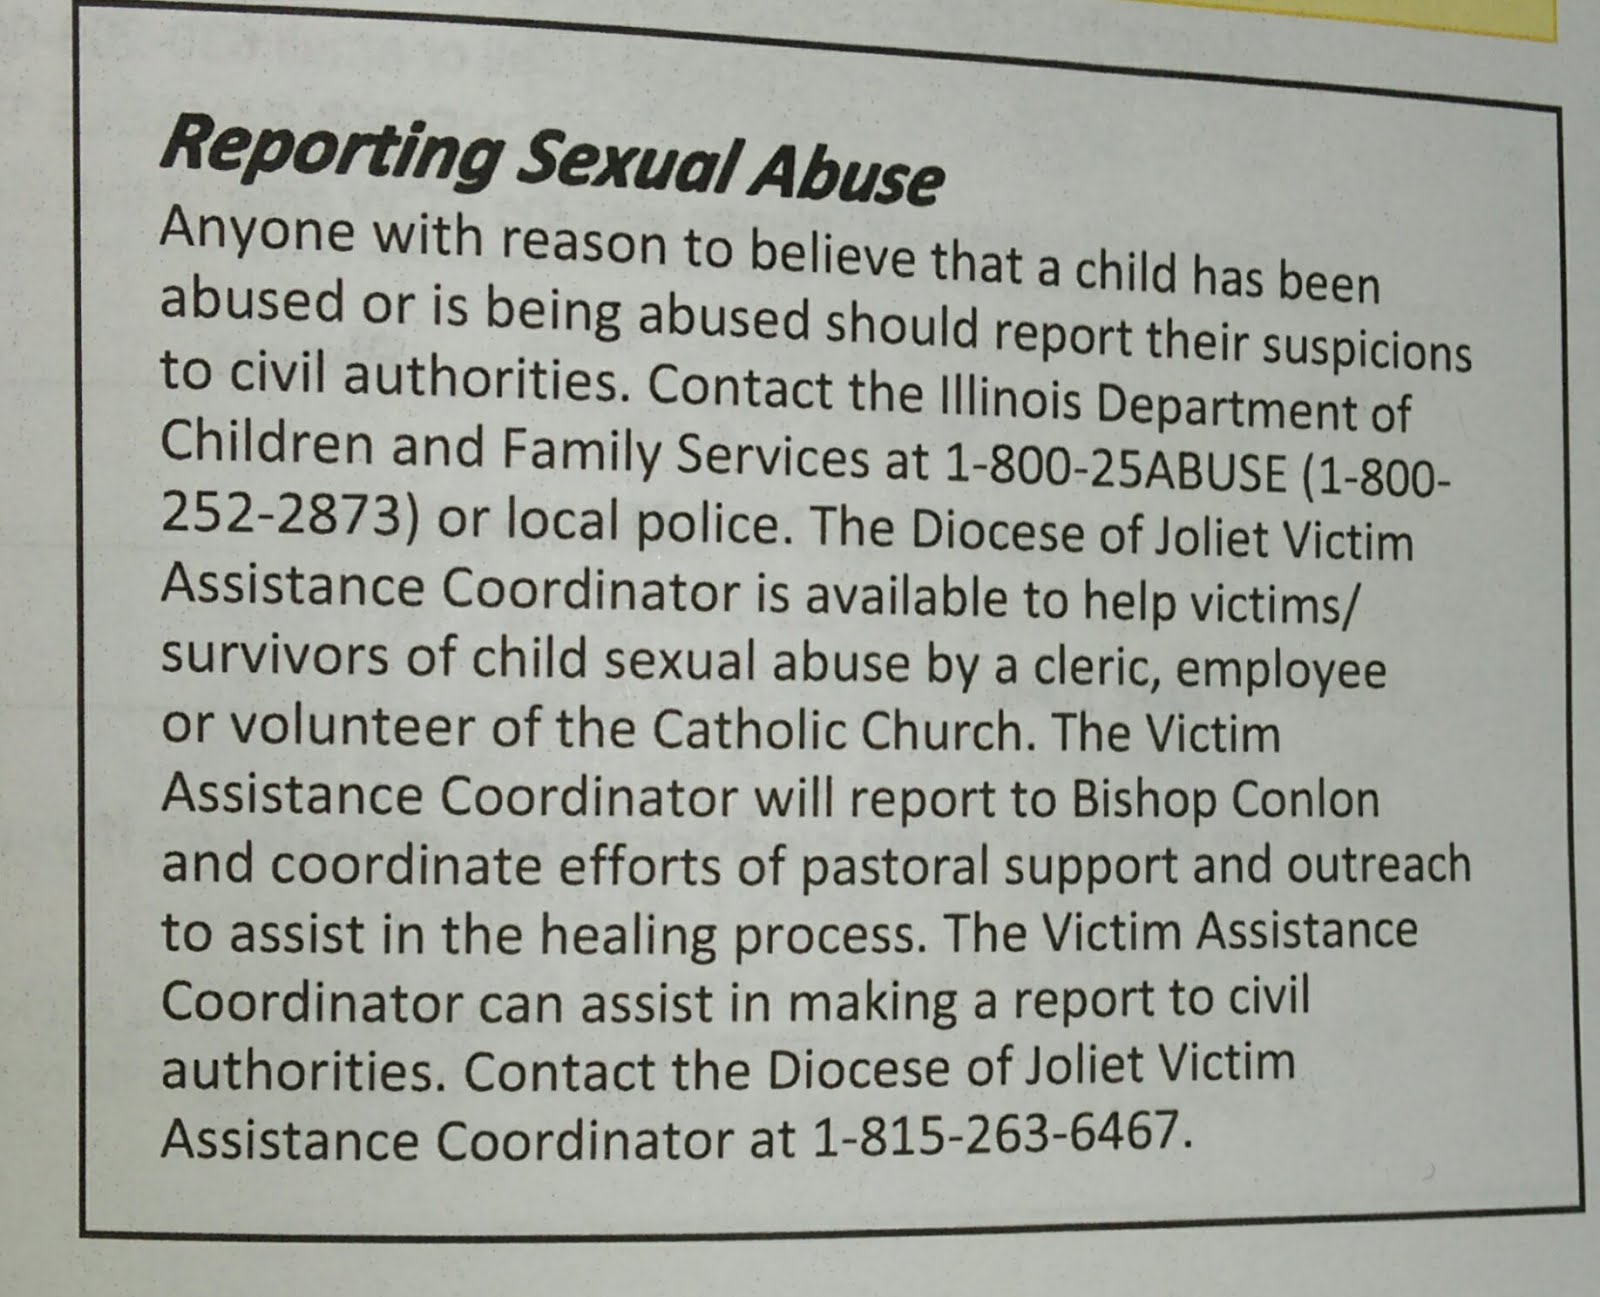 Reporting Sexual Abuse in a Catholic Church